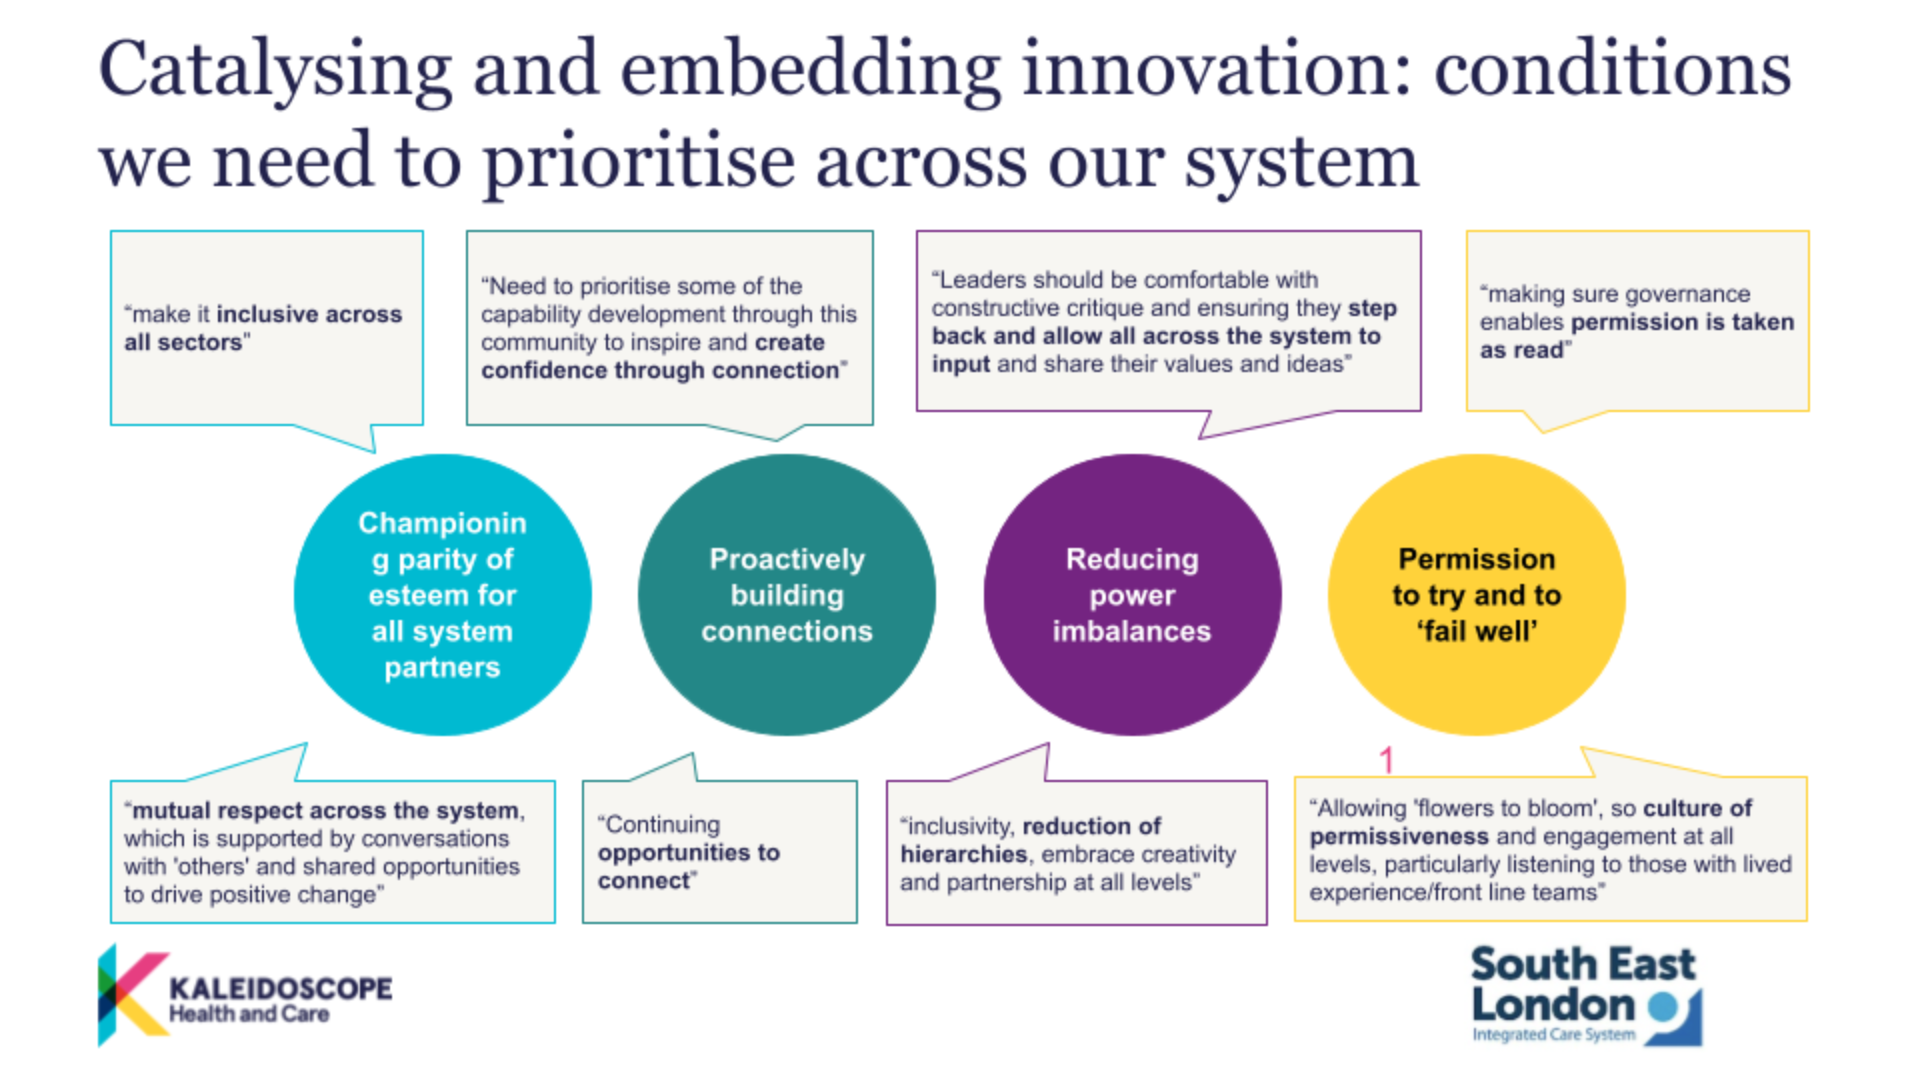 Catalysing and embedding innovation: conditions we need to prioritise across our system